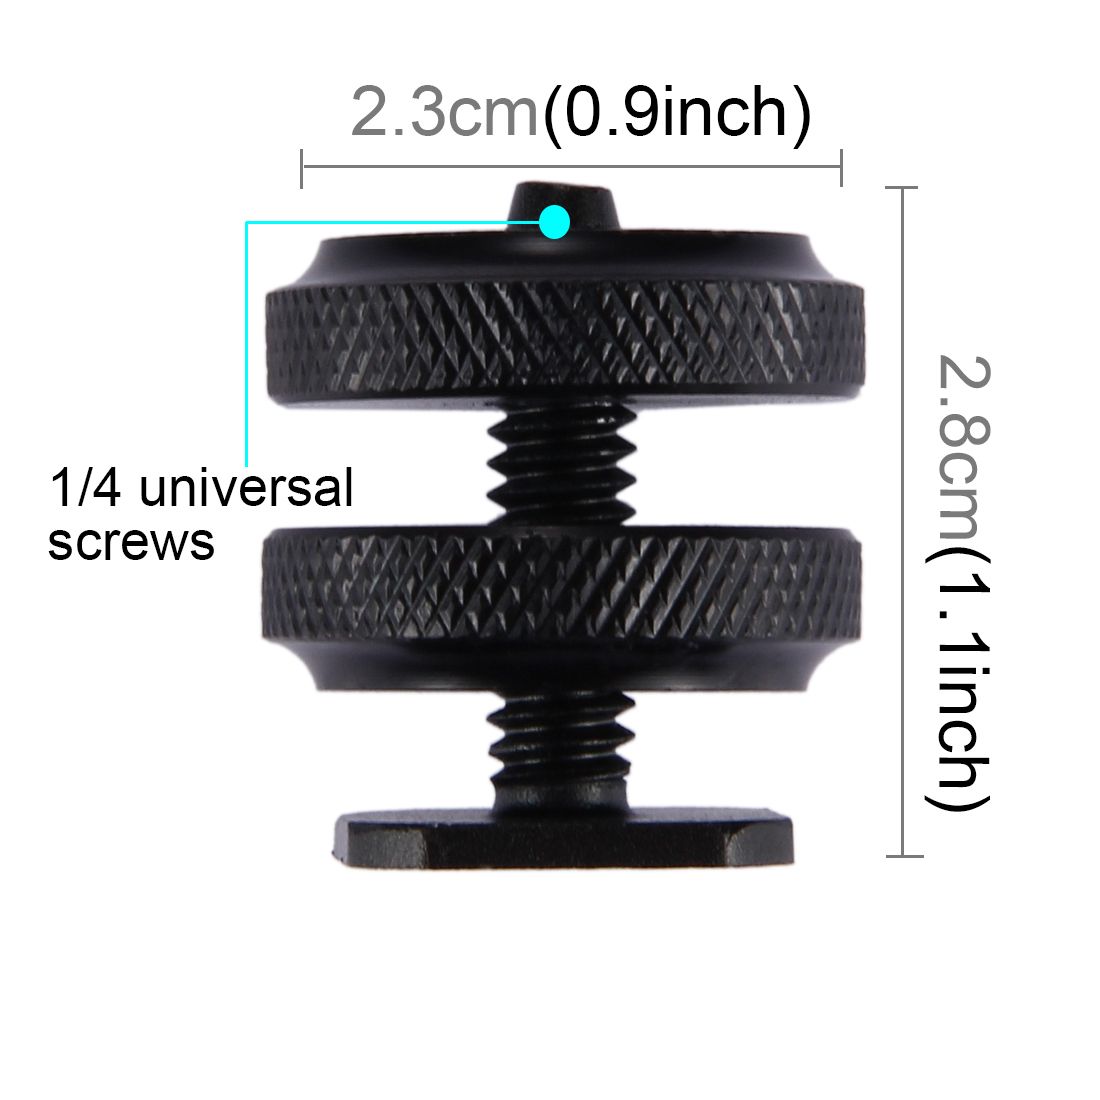 PULUZ-PU210-Reinforced-Hot-Shoe-Screw-Adapter-with-Double-Nut-for-DSLR-Cameras-GoPro-HERO5-4-3-2-1-1253595